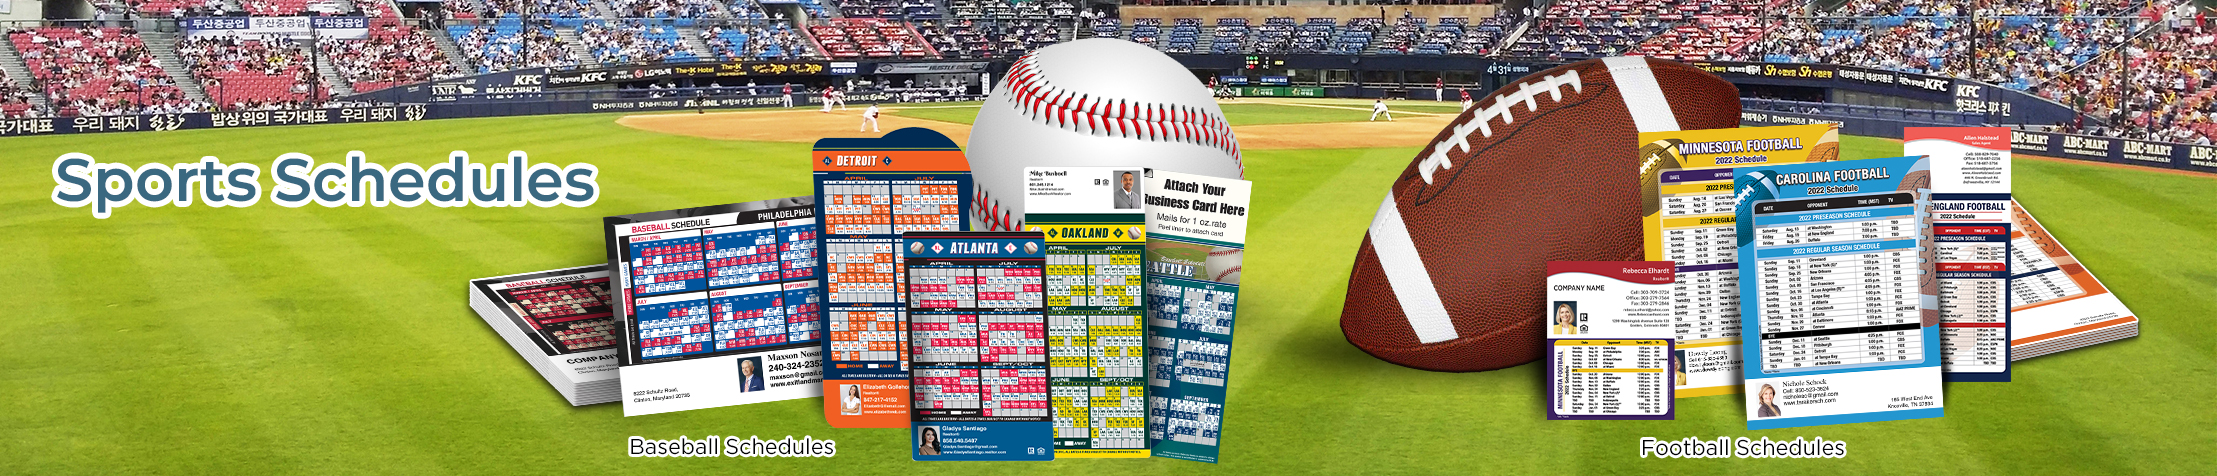 Realty Executives Real Estate Sports Schedules - Realty Executives custom sports schedule magnets | BestPrintBuy.com